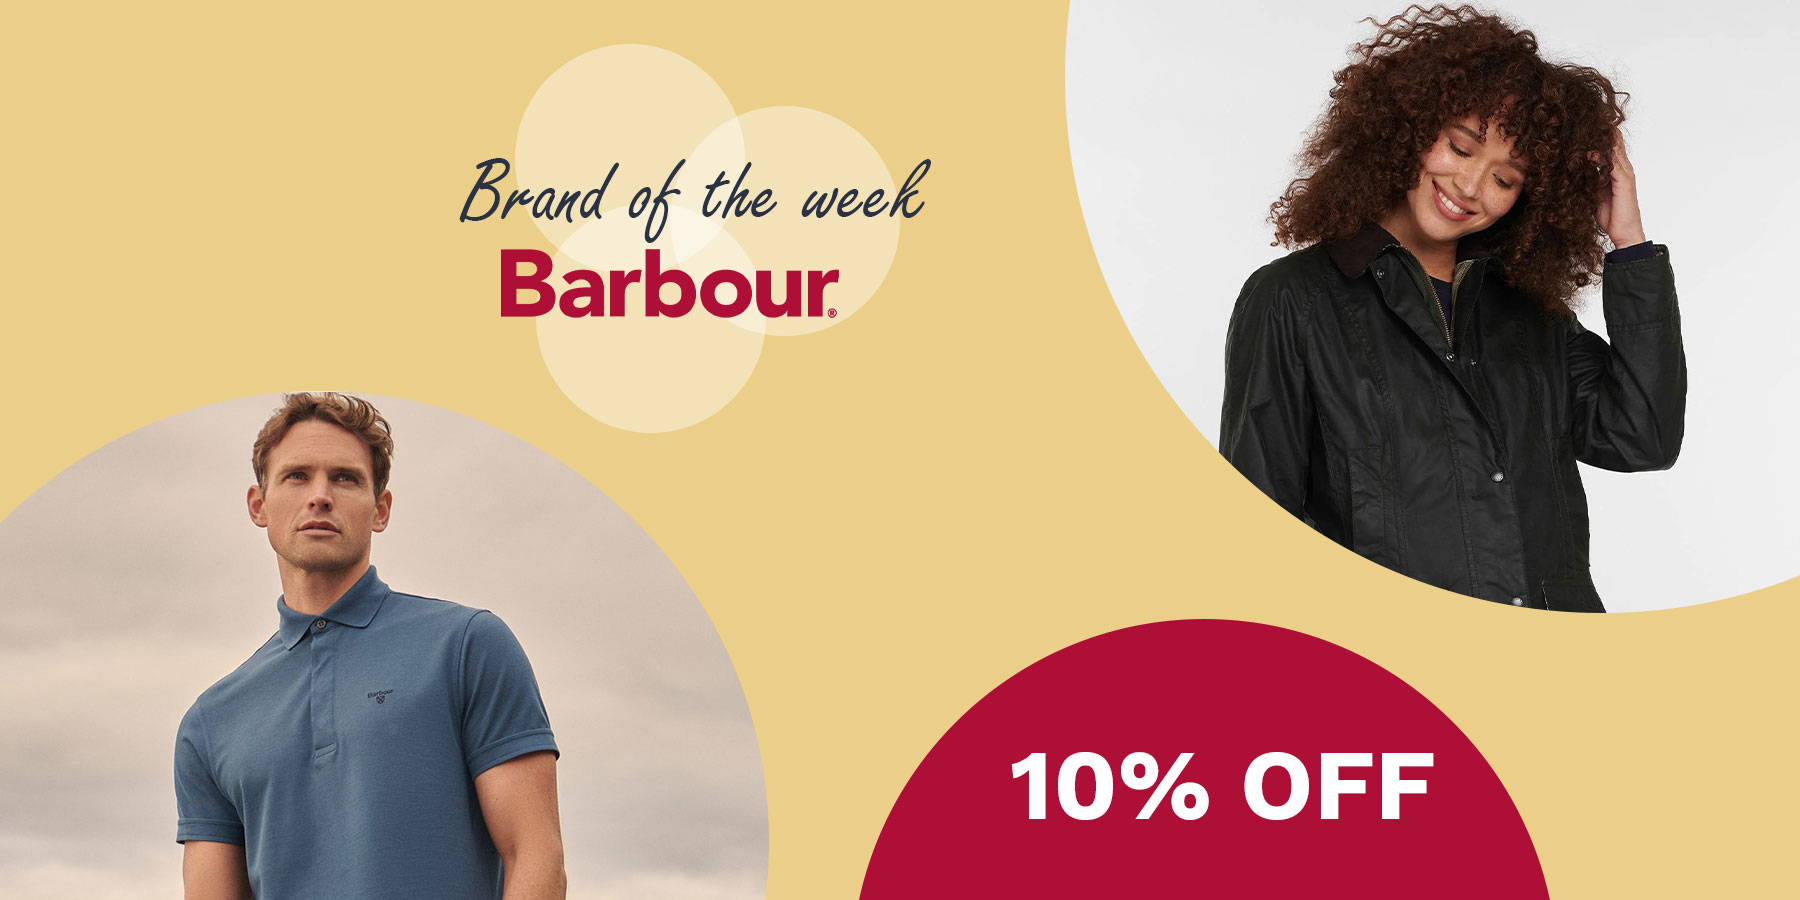 10% off the brand of the week - Barbour